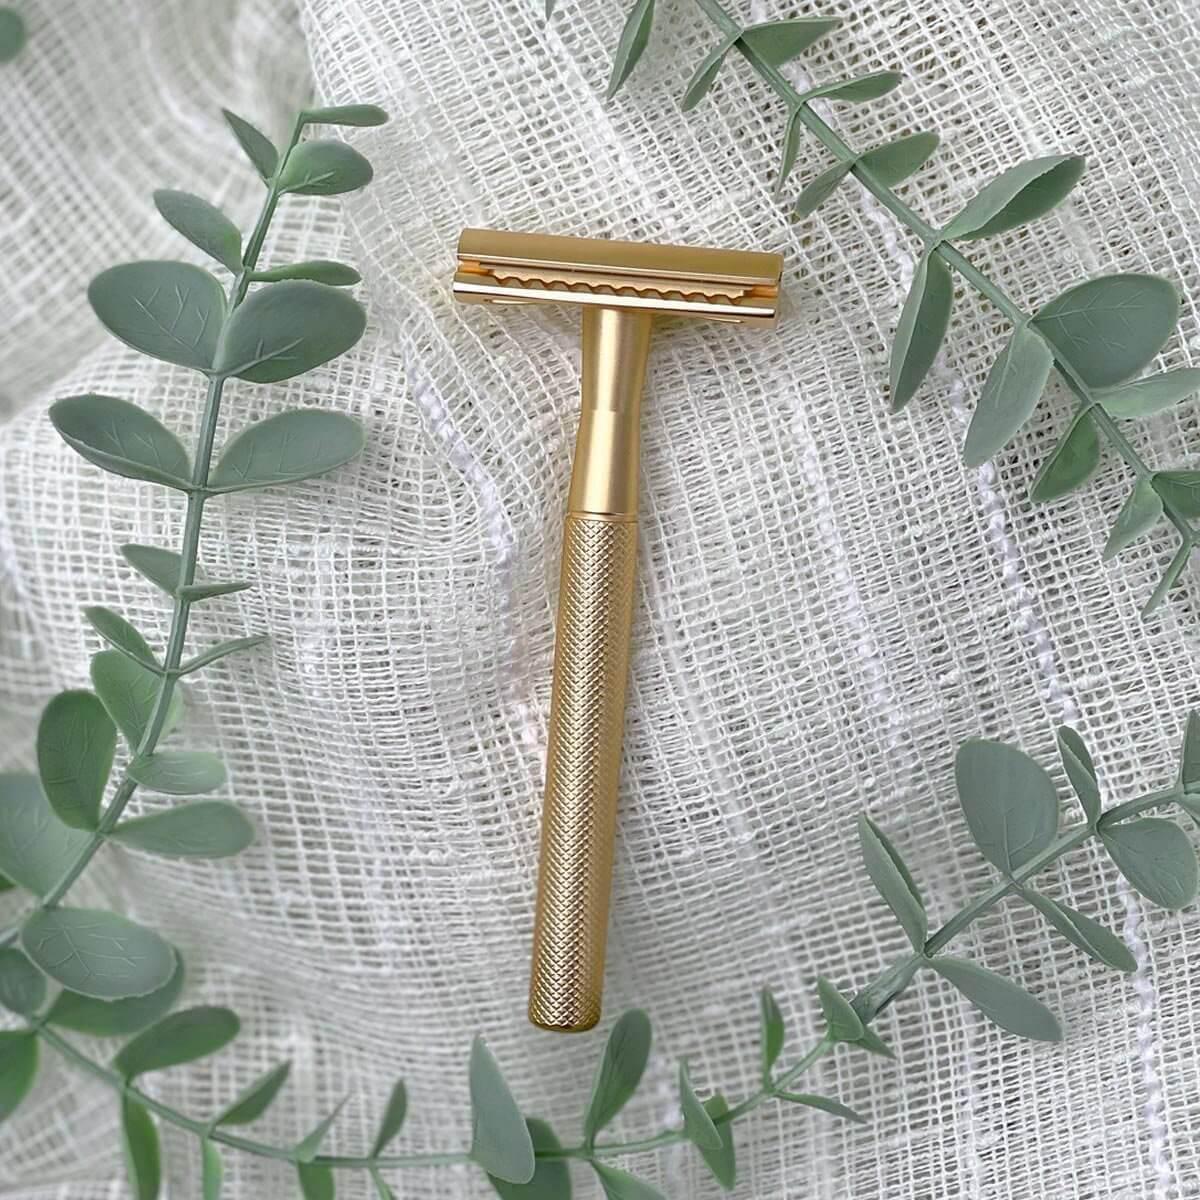 Reusable Safety Razor - Brush It On in Gold, Rose Gold